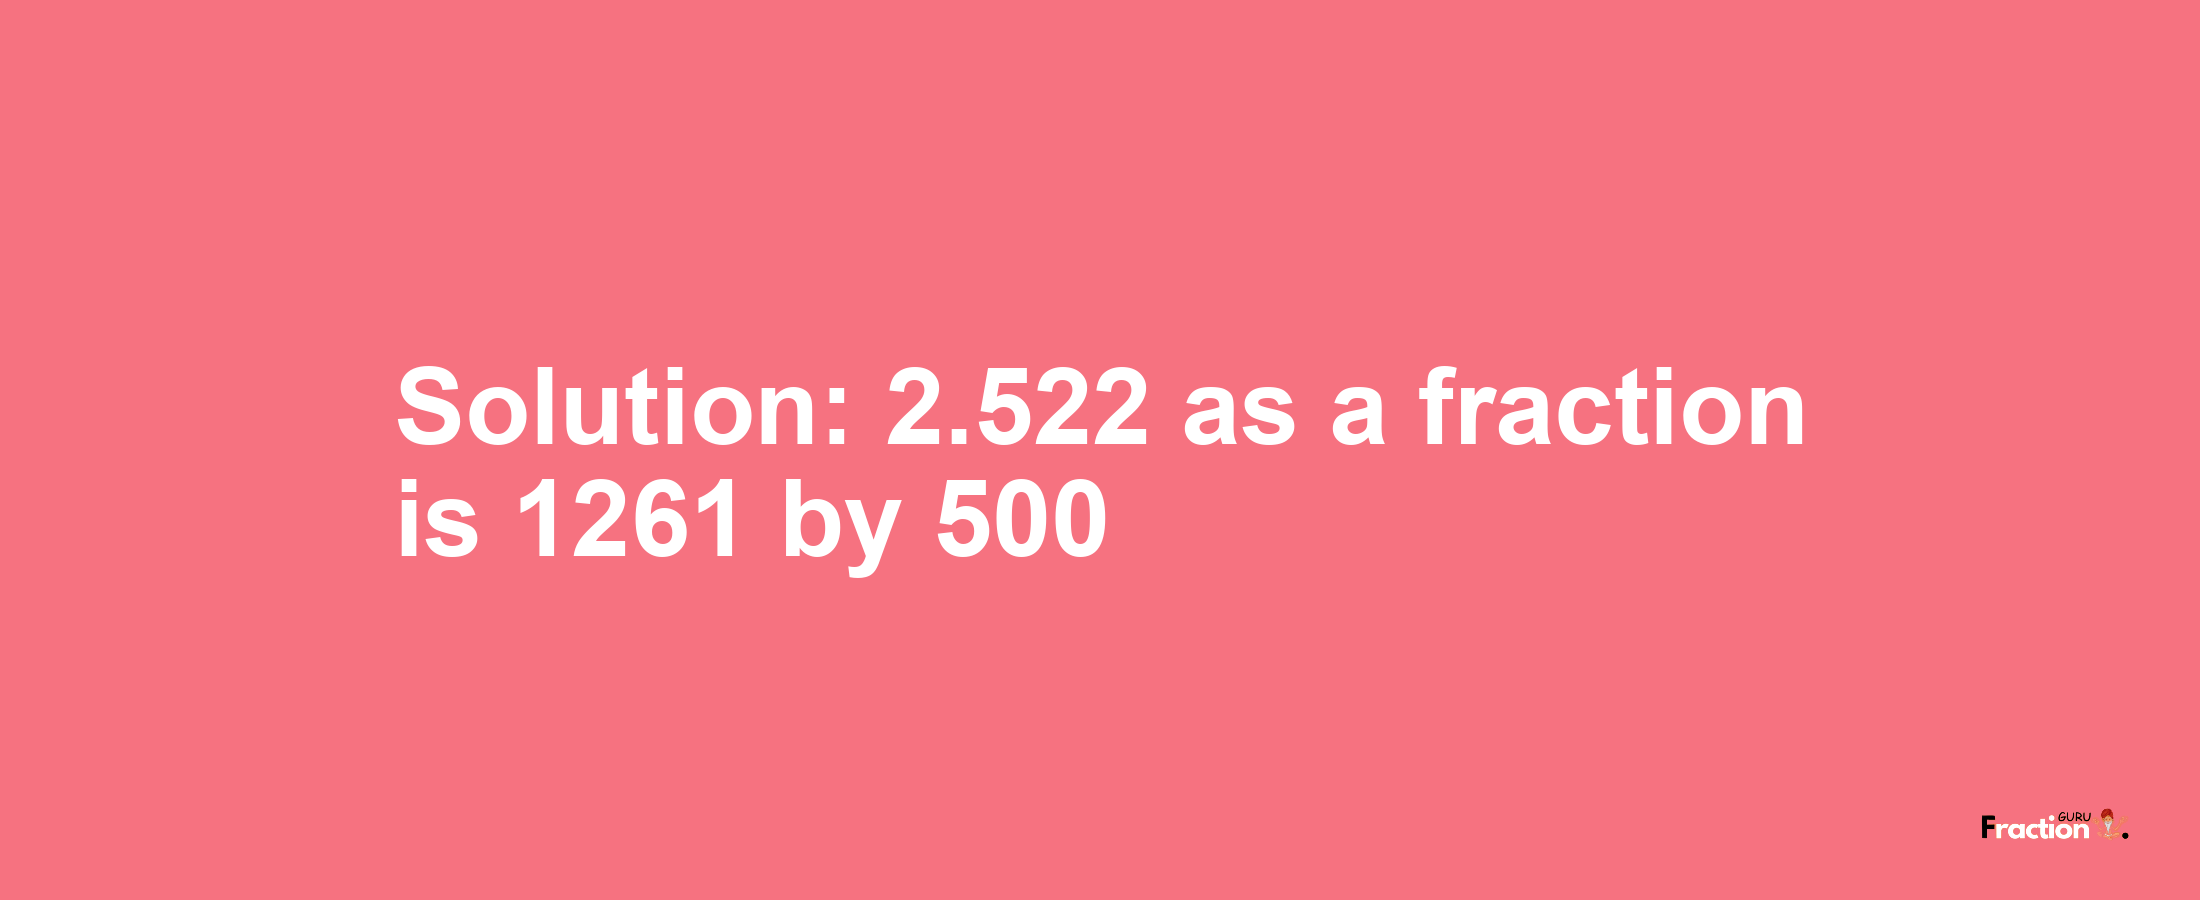 Solution:2.522 as a fraction is 1261/500